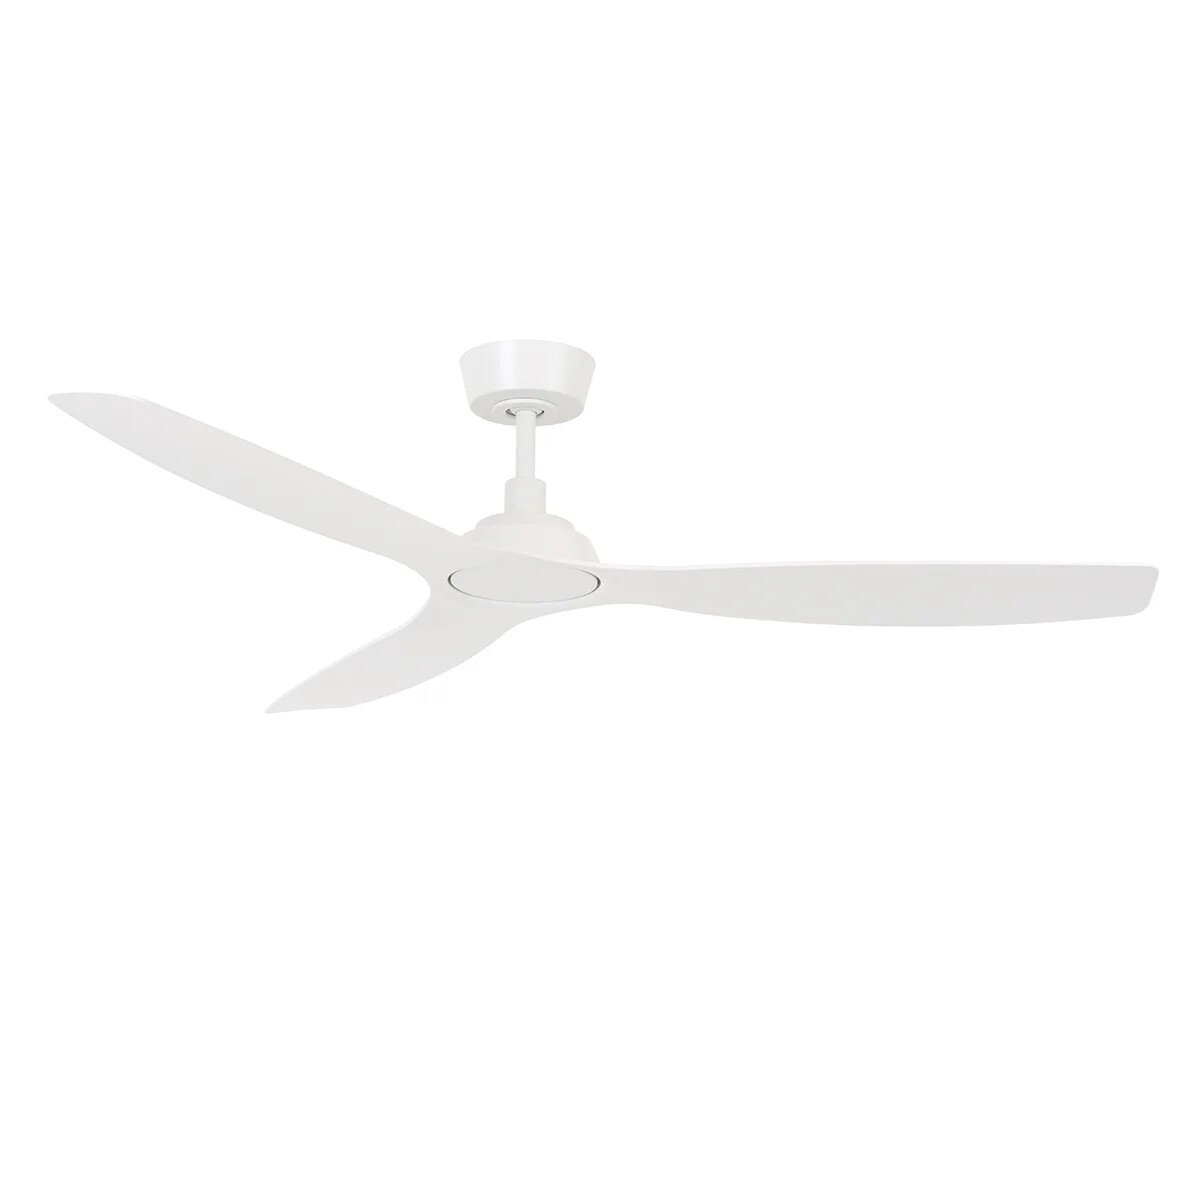 MOTO White ceiling fan Ø132 with remote control included